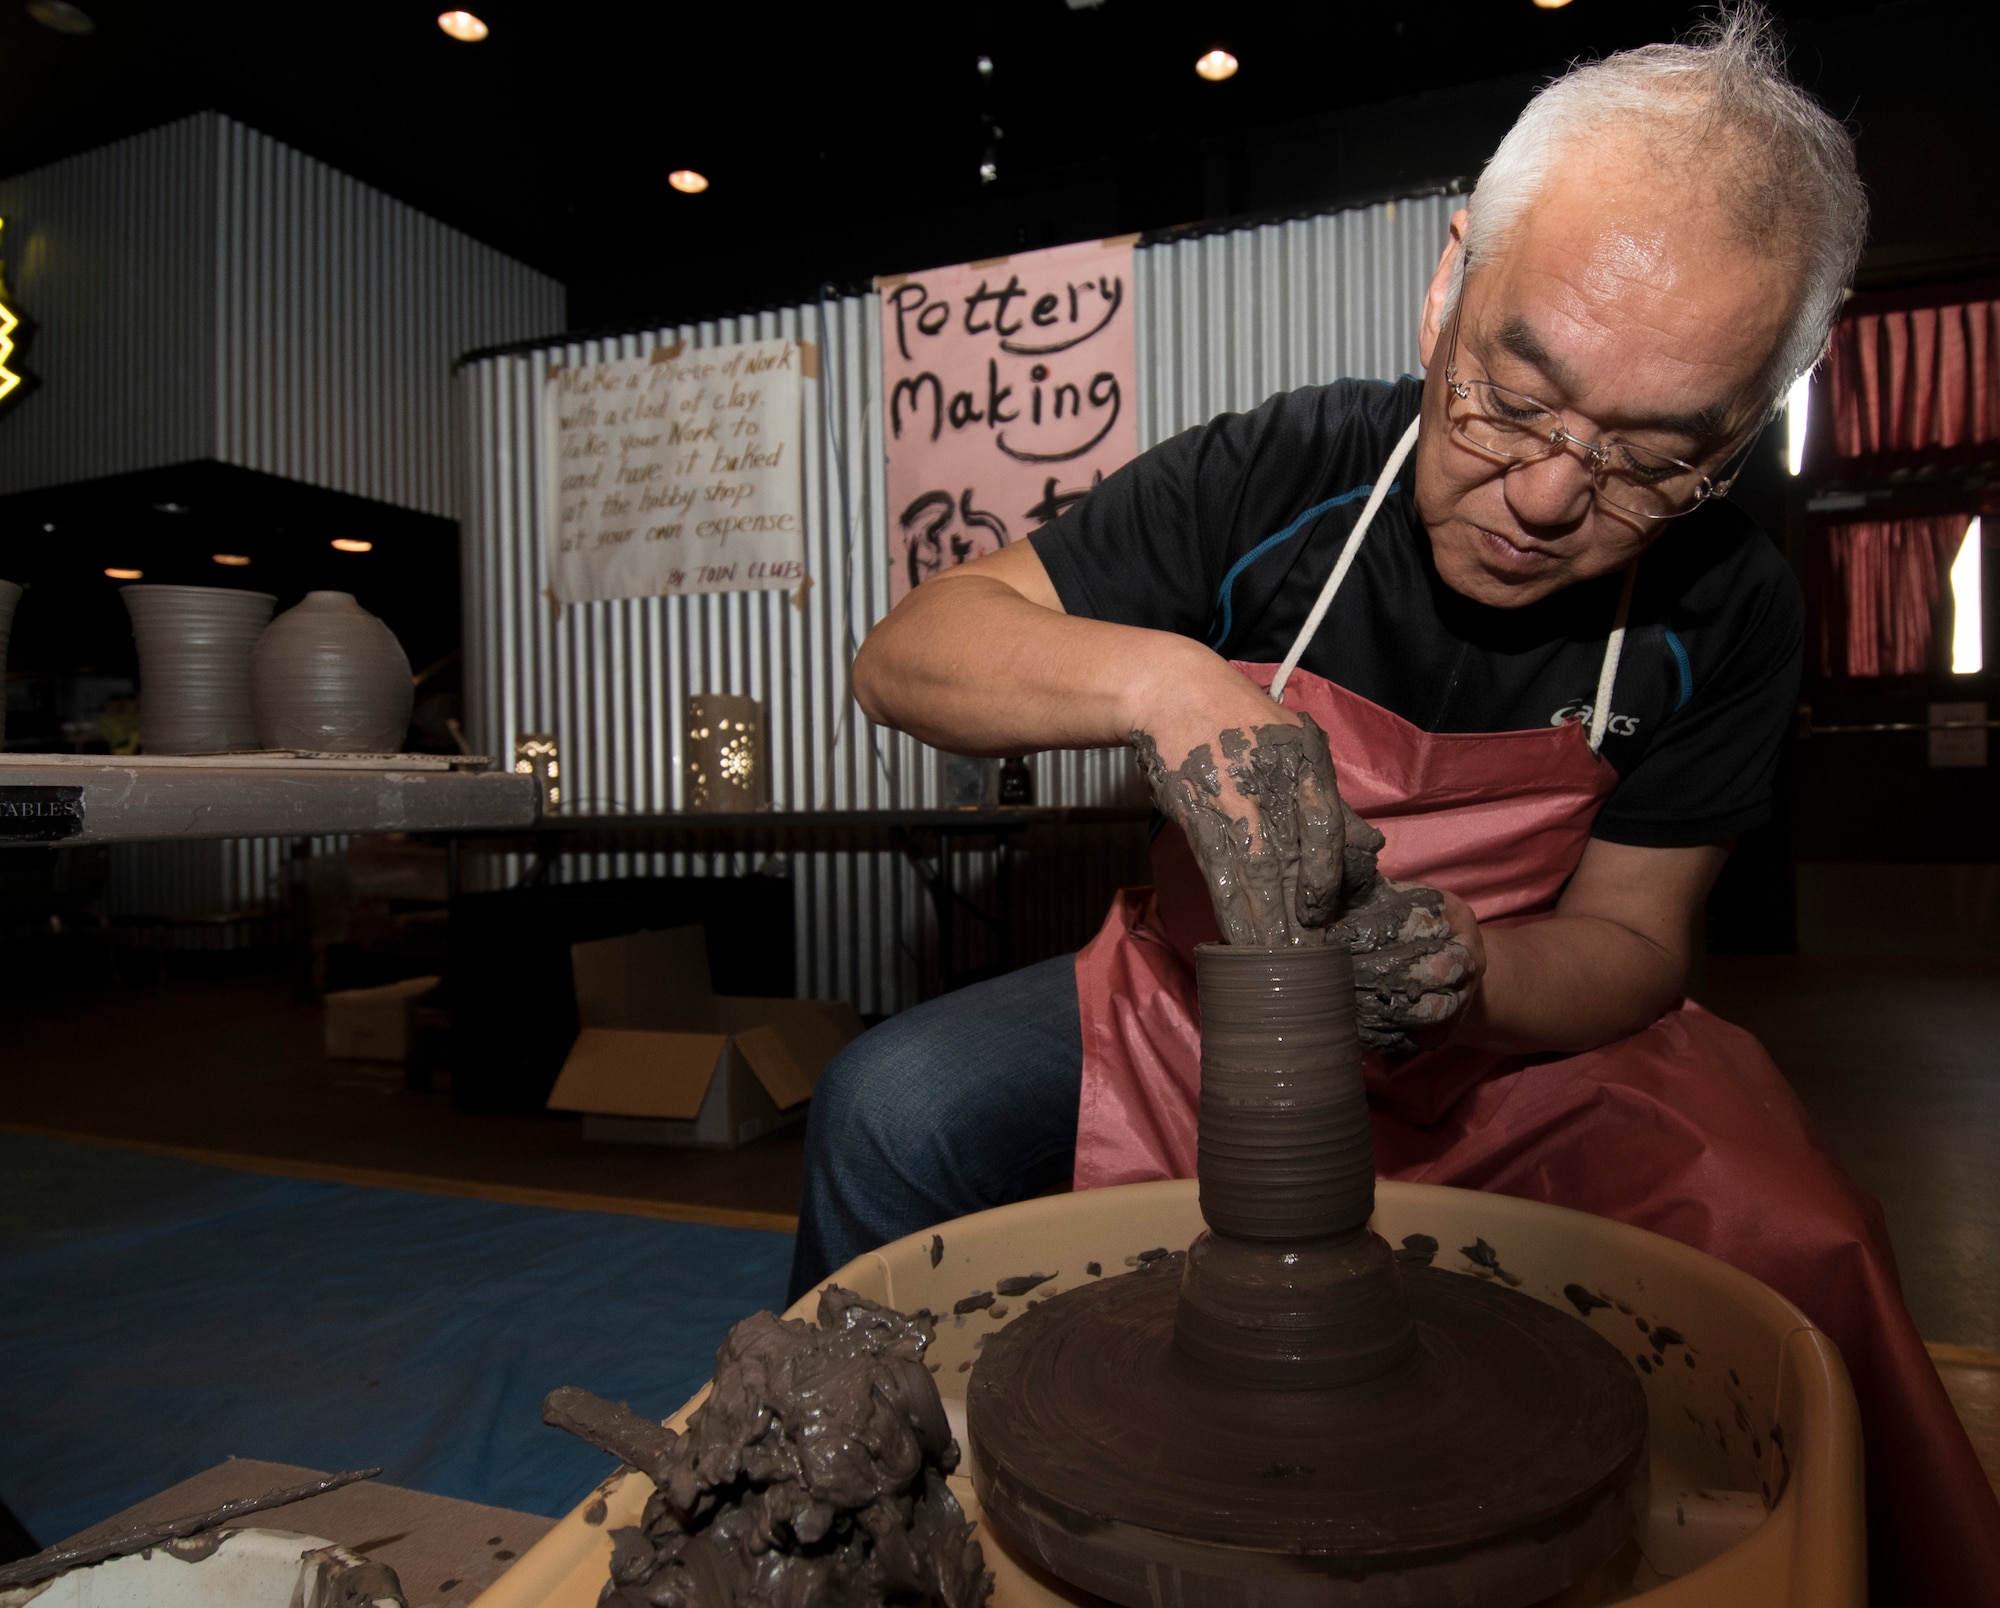 Hide Chika, an Aomori potter, creates a ceramic cup during the 30th Annual Japan Day at Misawa Air Base, Japan, April 8, 2017. Along with pottery, attendees partook in creating Japanese kites, embroidery and origami crafts with the local community. (U.S. Air Force photo by Airman 1st Class Sadie Colbert)